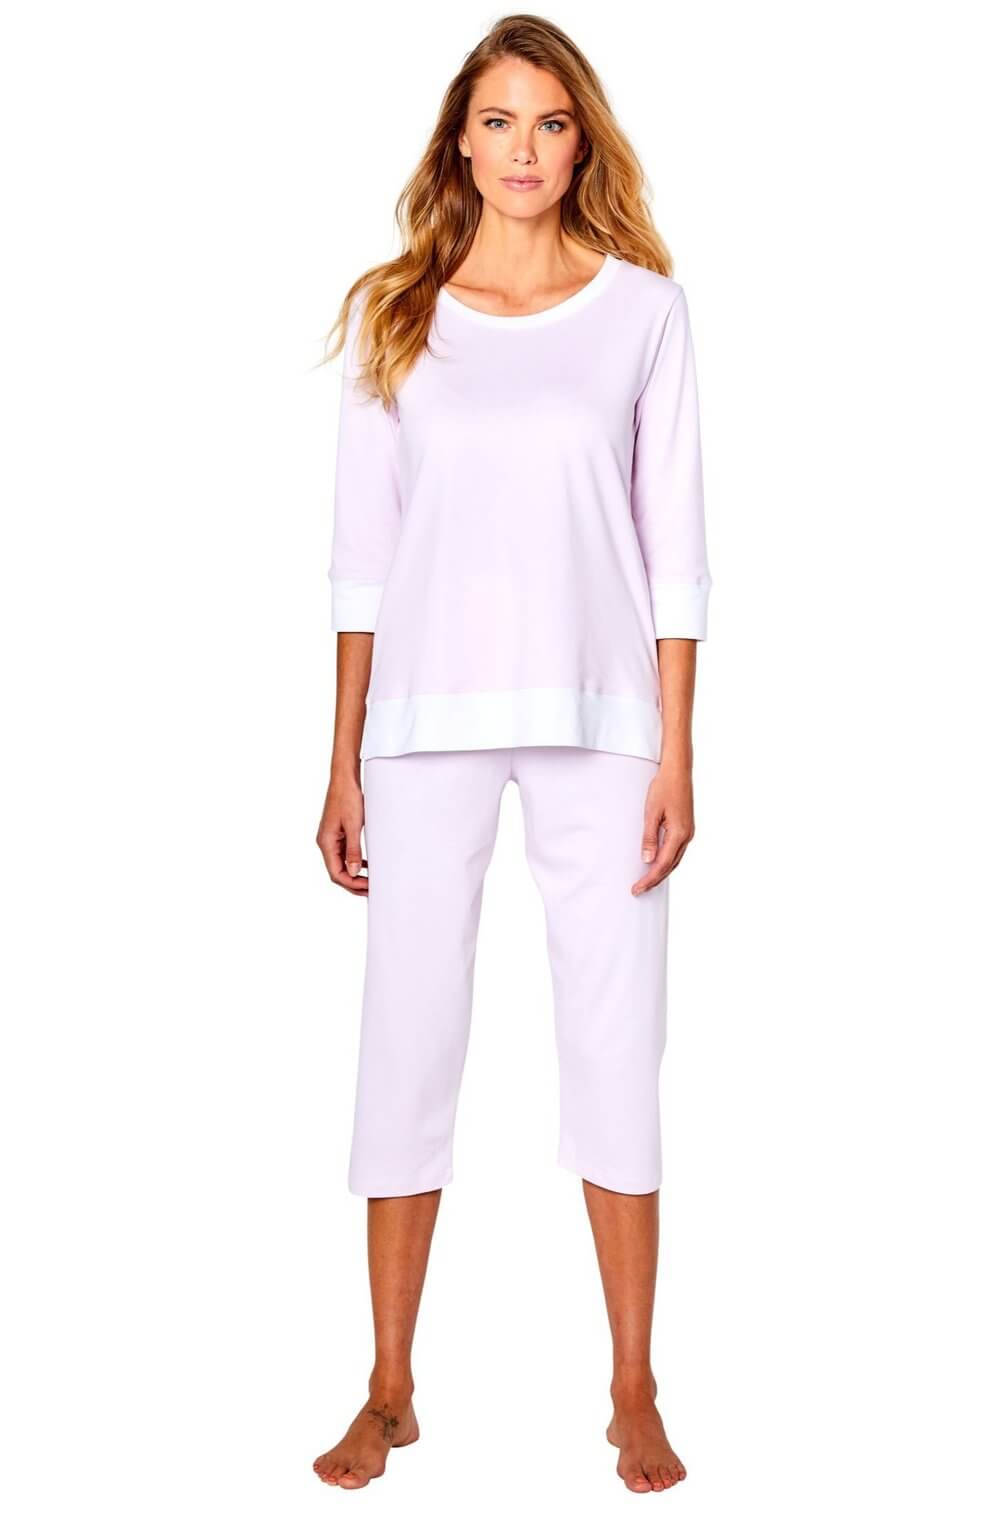 Marelle Victoria 3/4 Sleeve PJ Set Color: Pink Size: XS at Petticoat Lane  Greenwich, CT